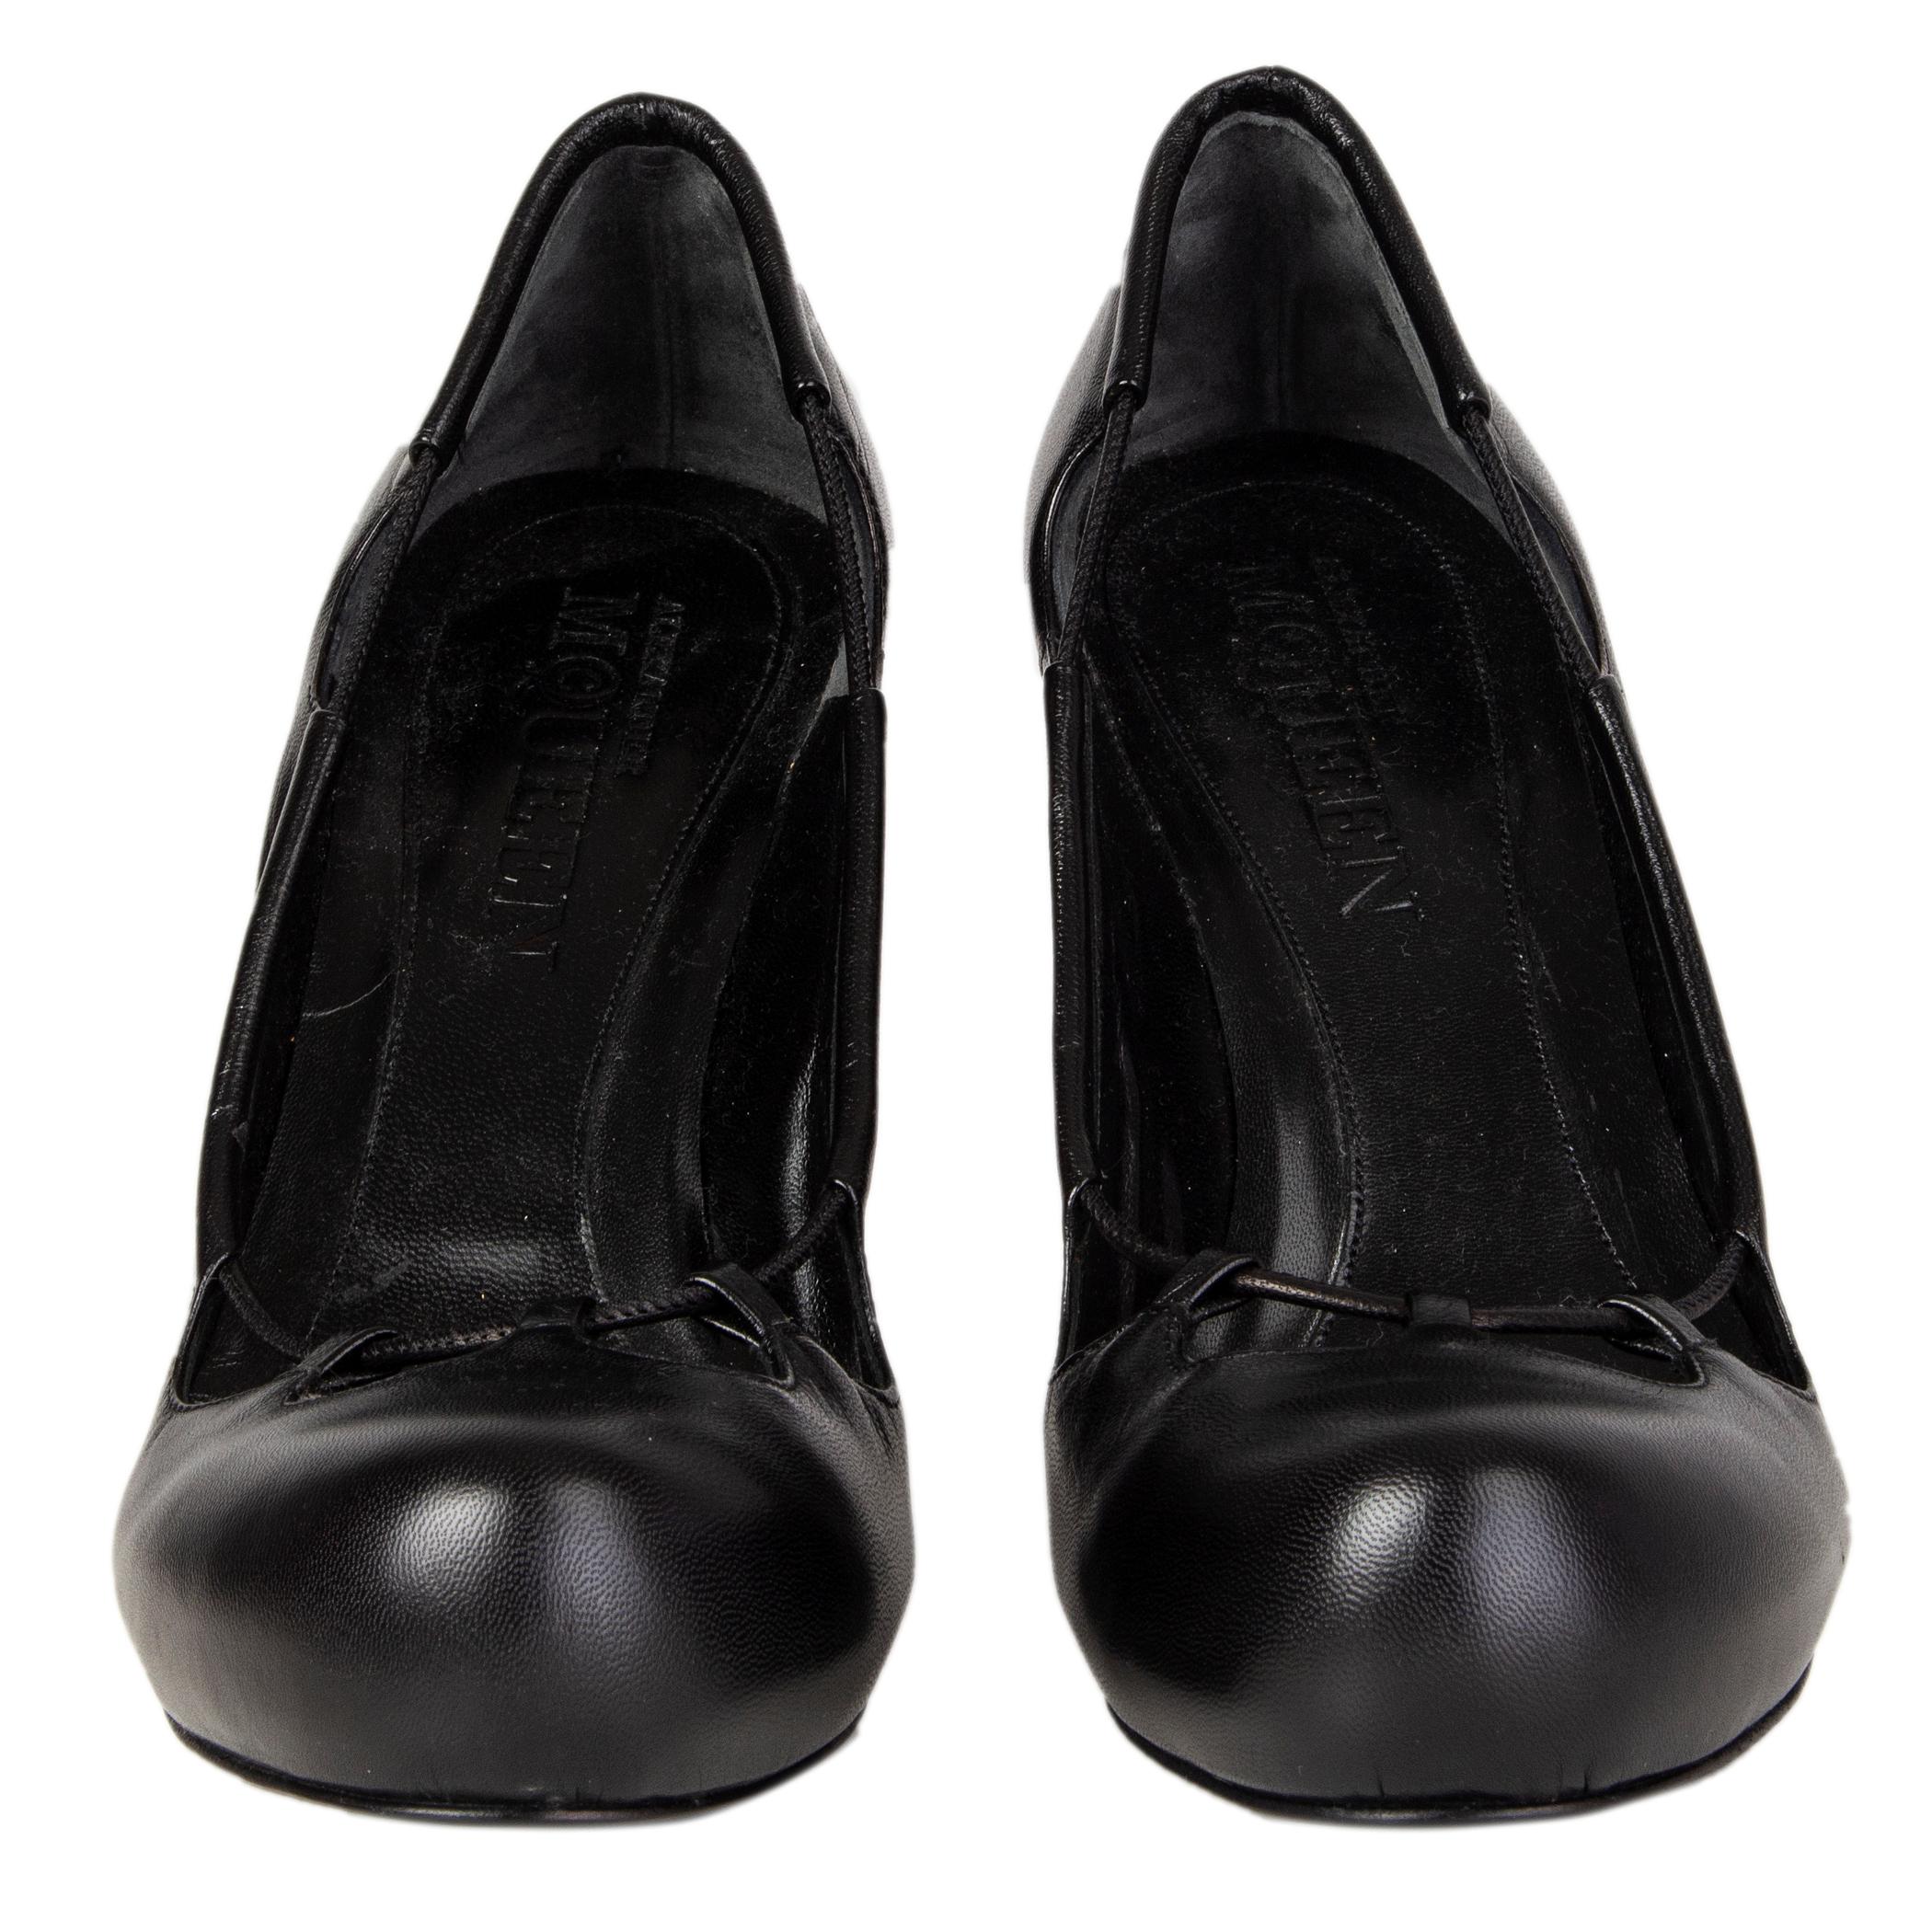 100% authentic Alexander McQueen 'Haze' pumps in black leather with cut-out details. Brand new. Come with dust bag. 

Measurements
Imprinted Size	39.5
Shoe Size	39.5
Inside Sole	25-.5
Width	7.5cm (2.9in)
Heel	10.5cm (4.1in)
Platform:	1.5cm